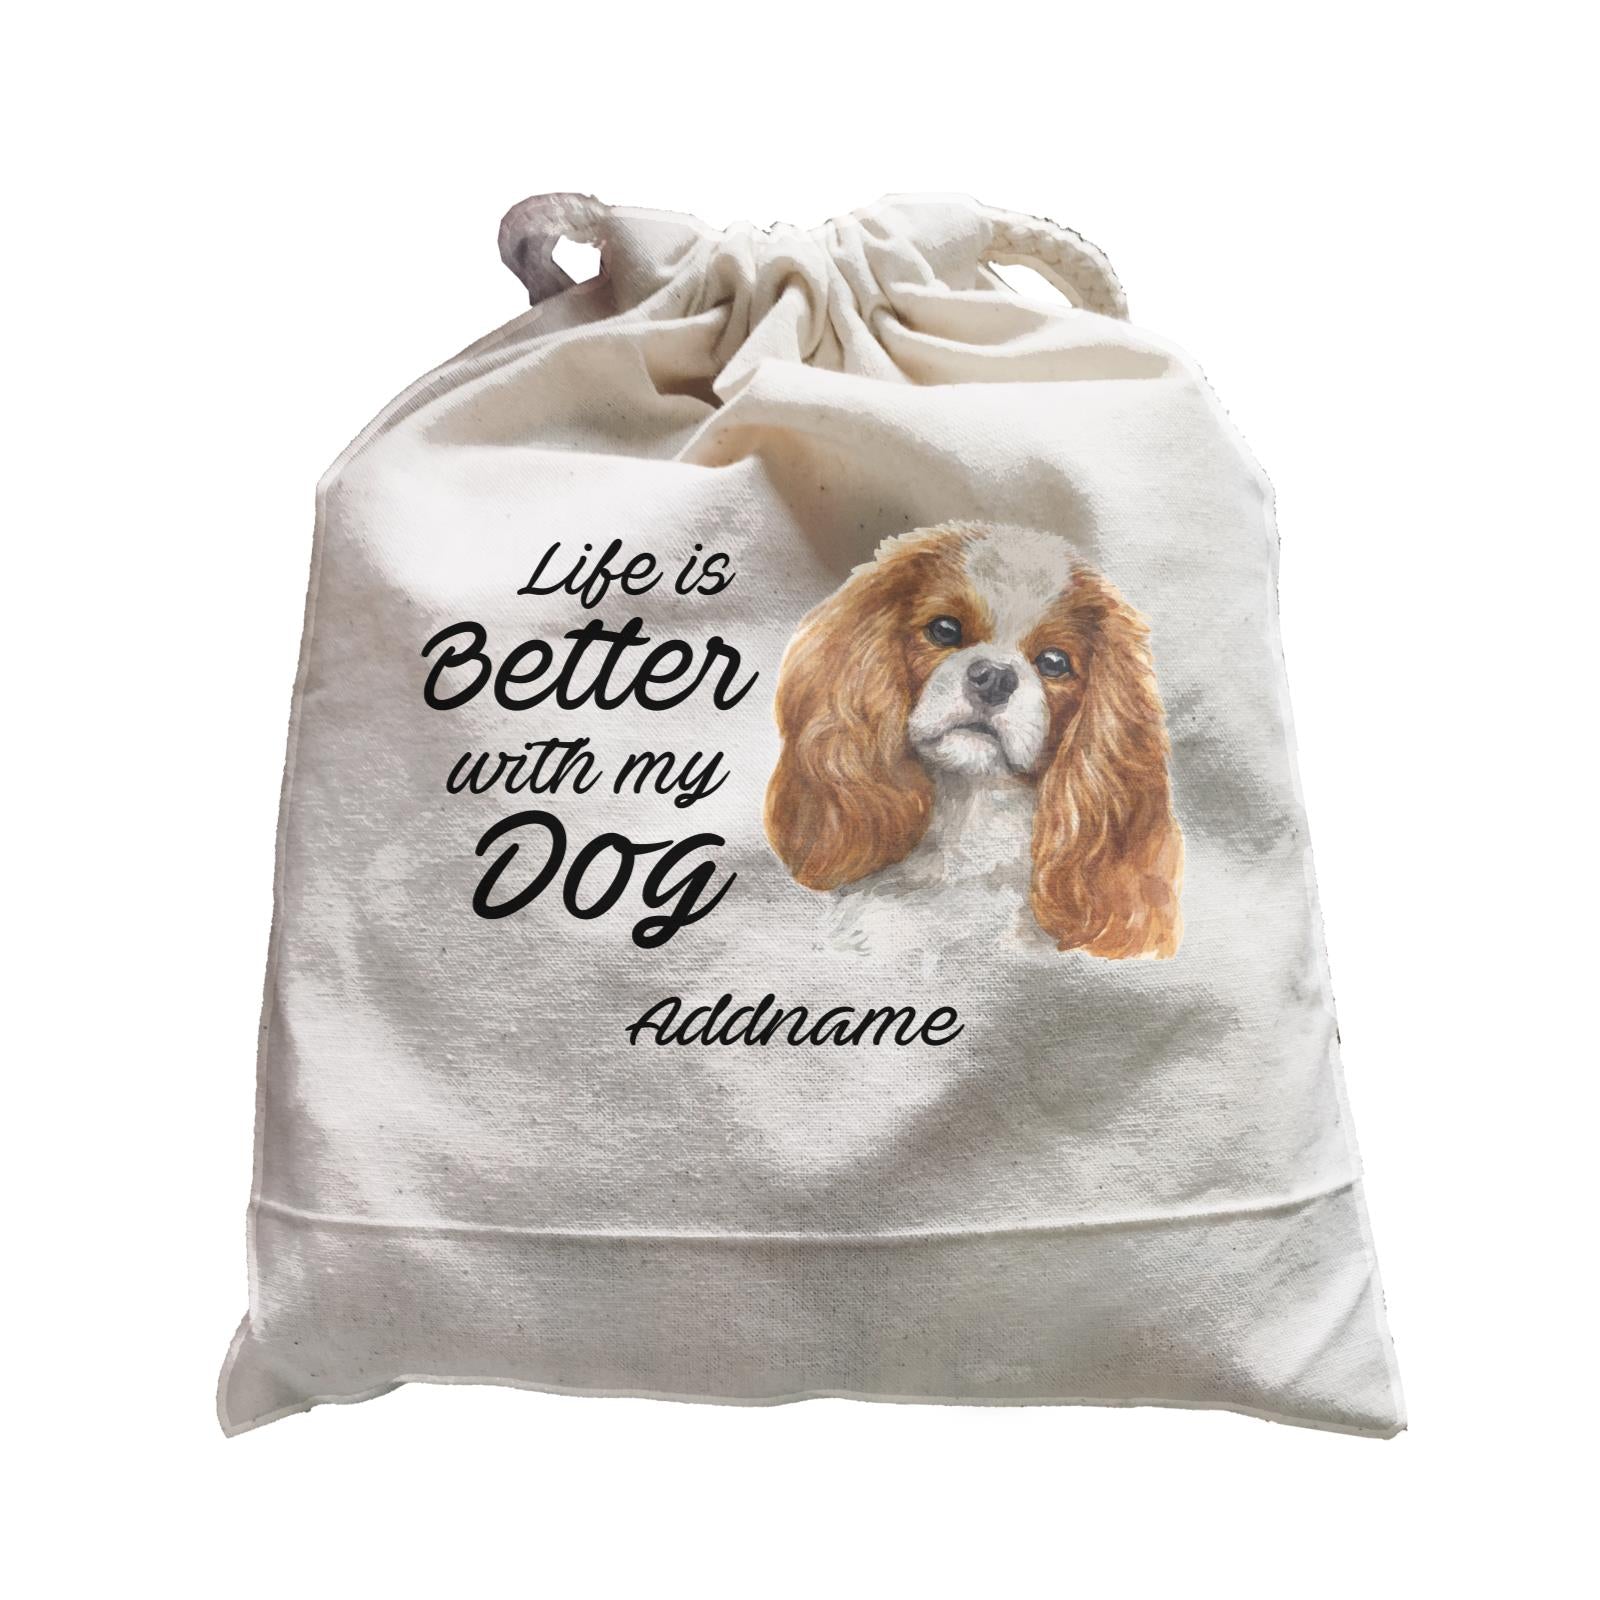 Watercolor Life is Better With My Dog King Charles Spaniel Curly Addname Satchel